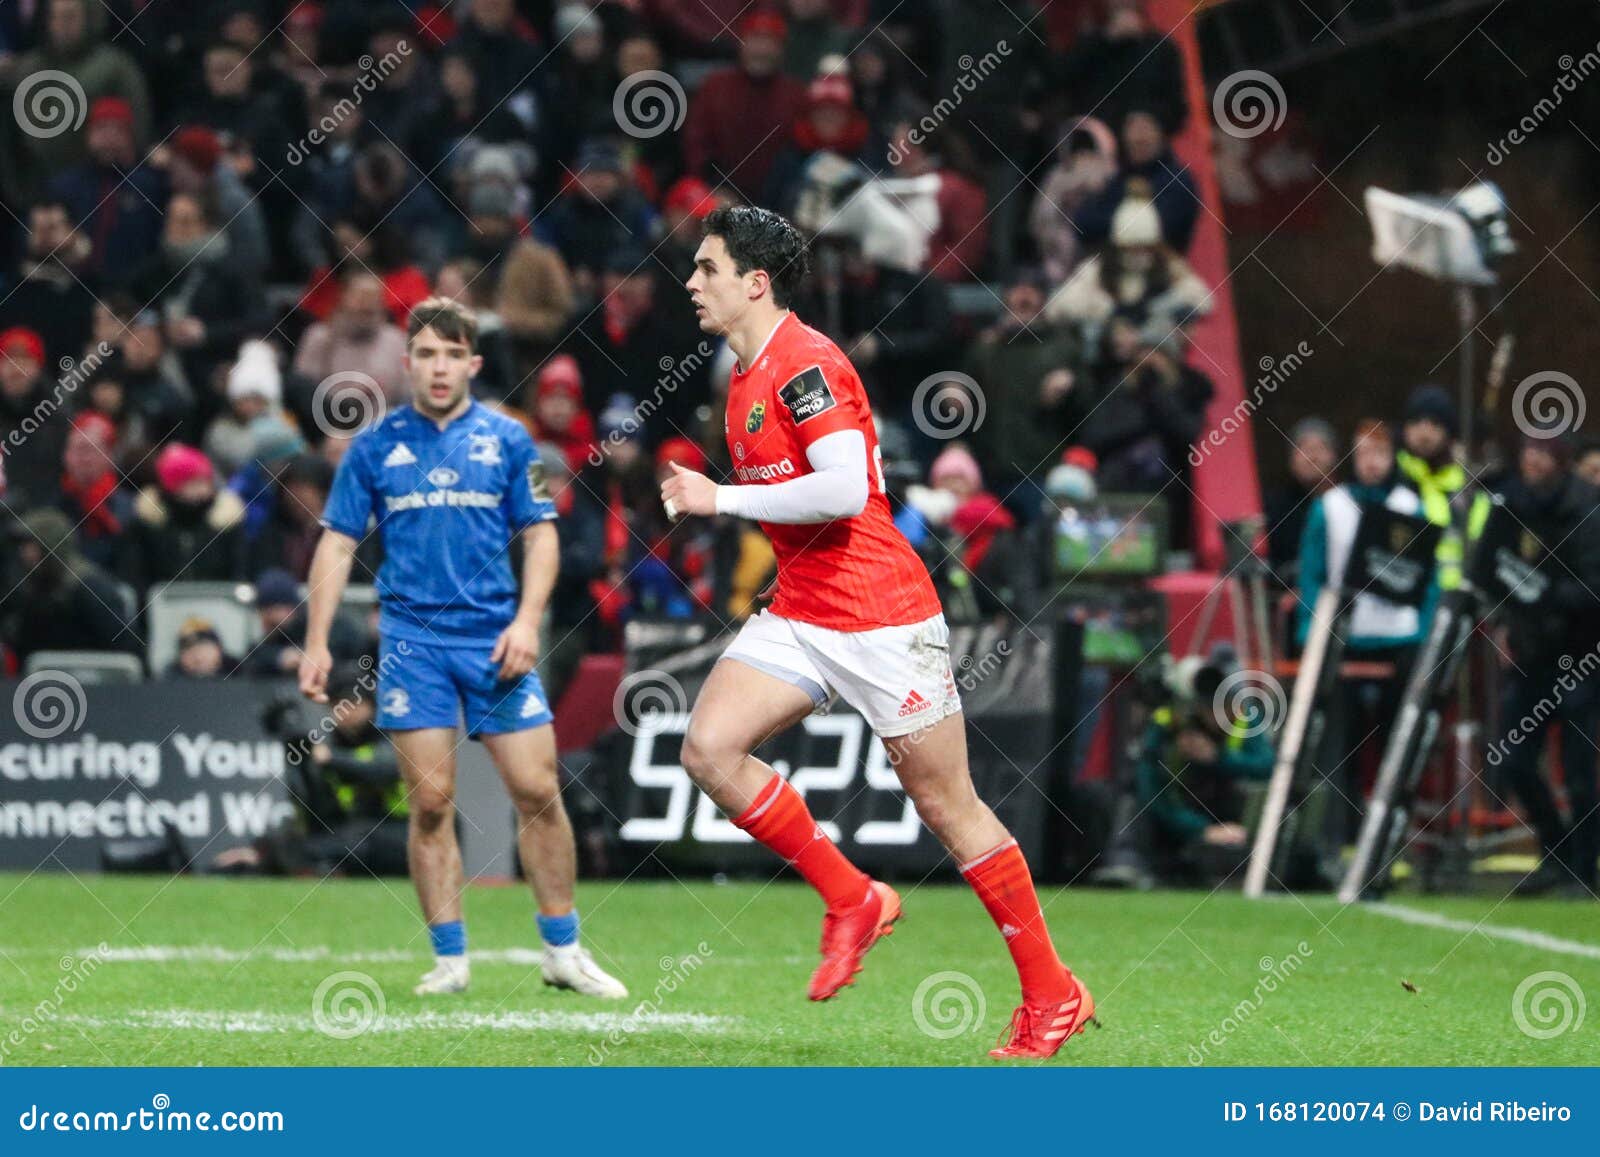 Joey Carbery at the Pro 14 Match - Munster Rugby Versus Leinster Rugby Match at Thomond Park Editorial Stock Image